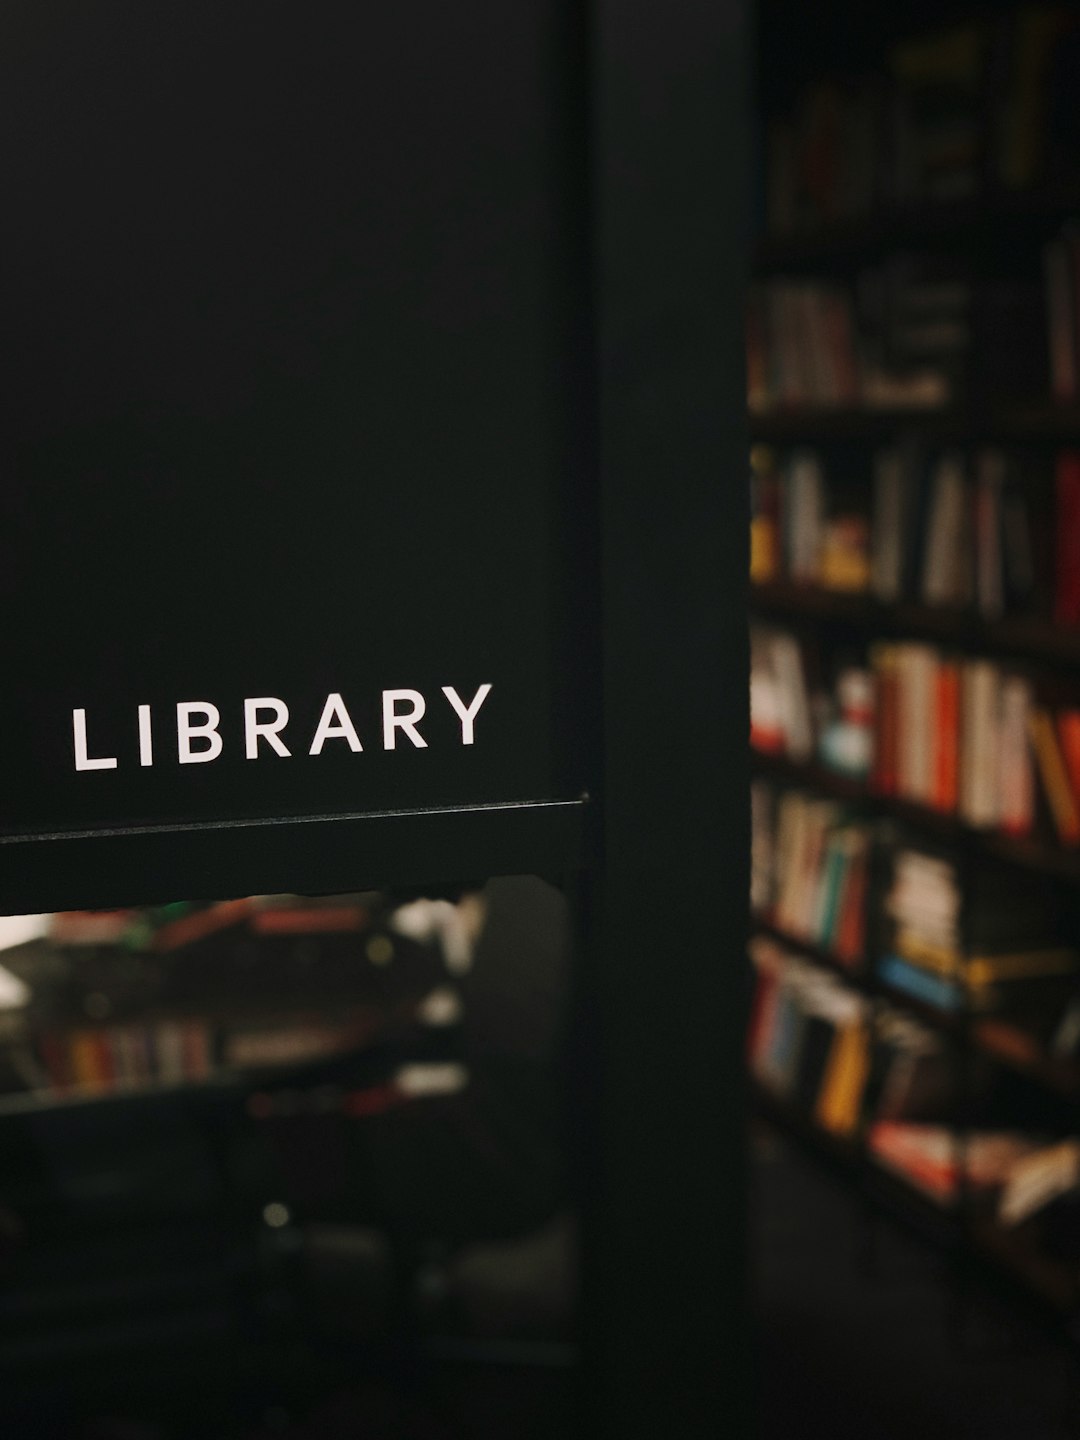 Library wooden sign